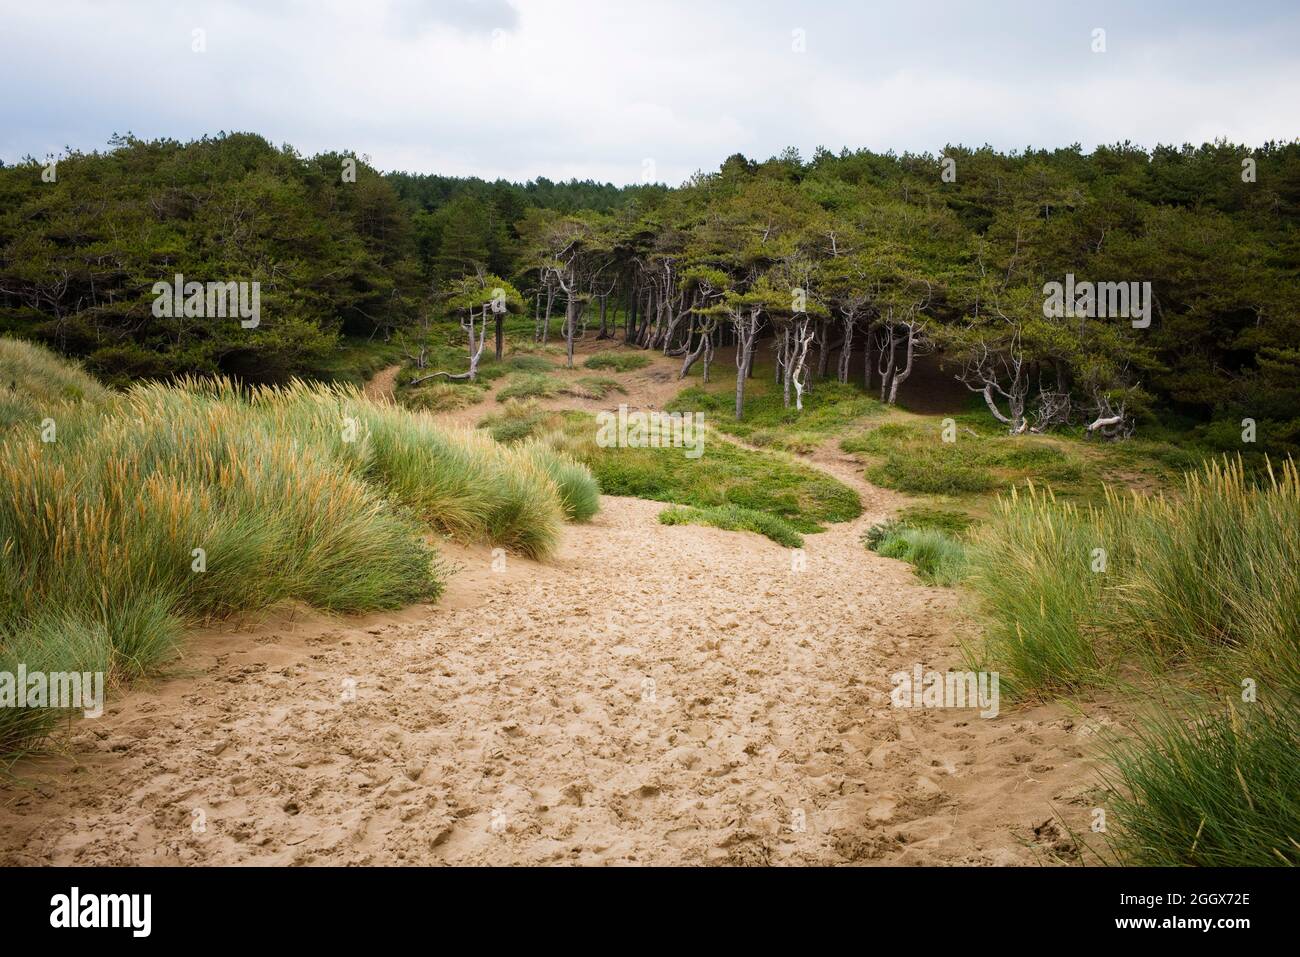 Sand dunes at Formby looking towards the woodland area Stock Photo